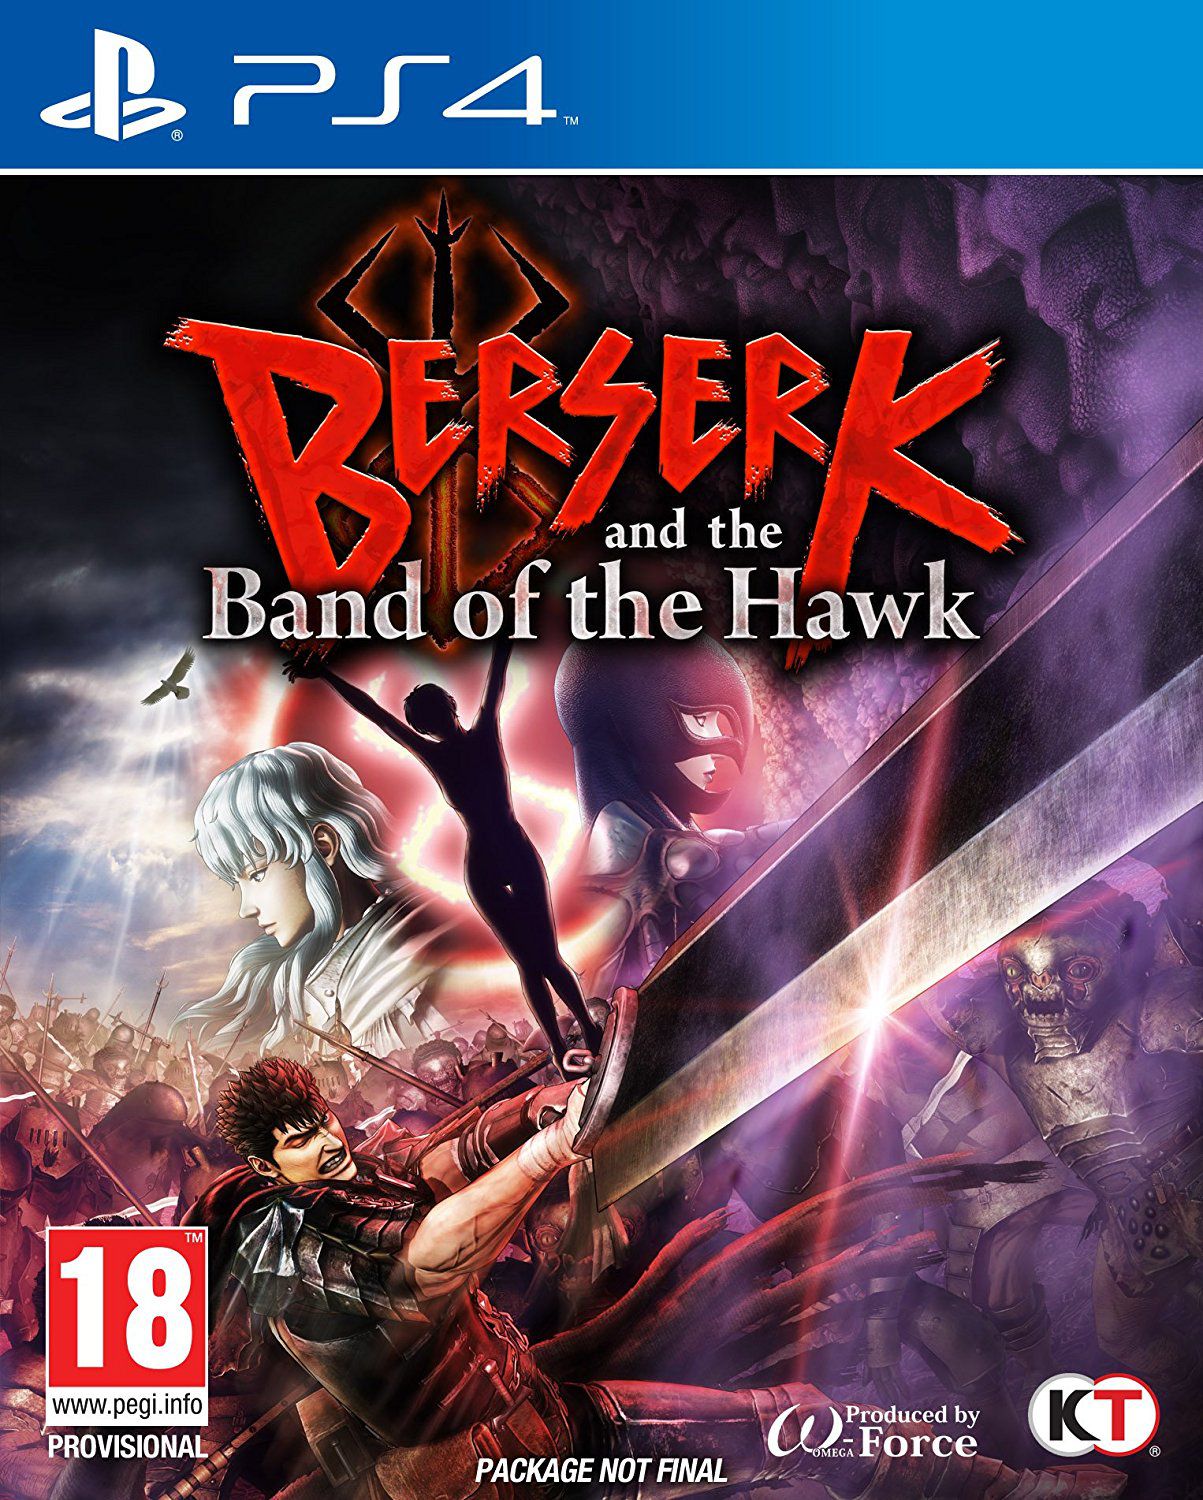 Berserk and the Band of the Hawk (2016)  - Jeu vidéo streaming VF gratuit complet